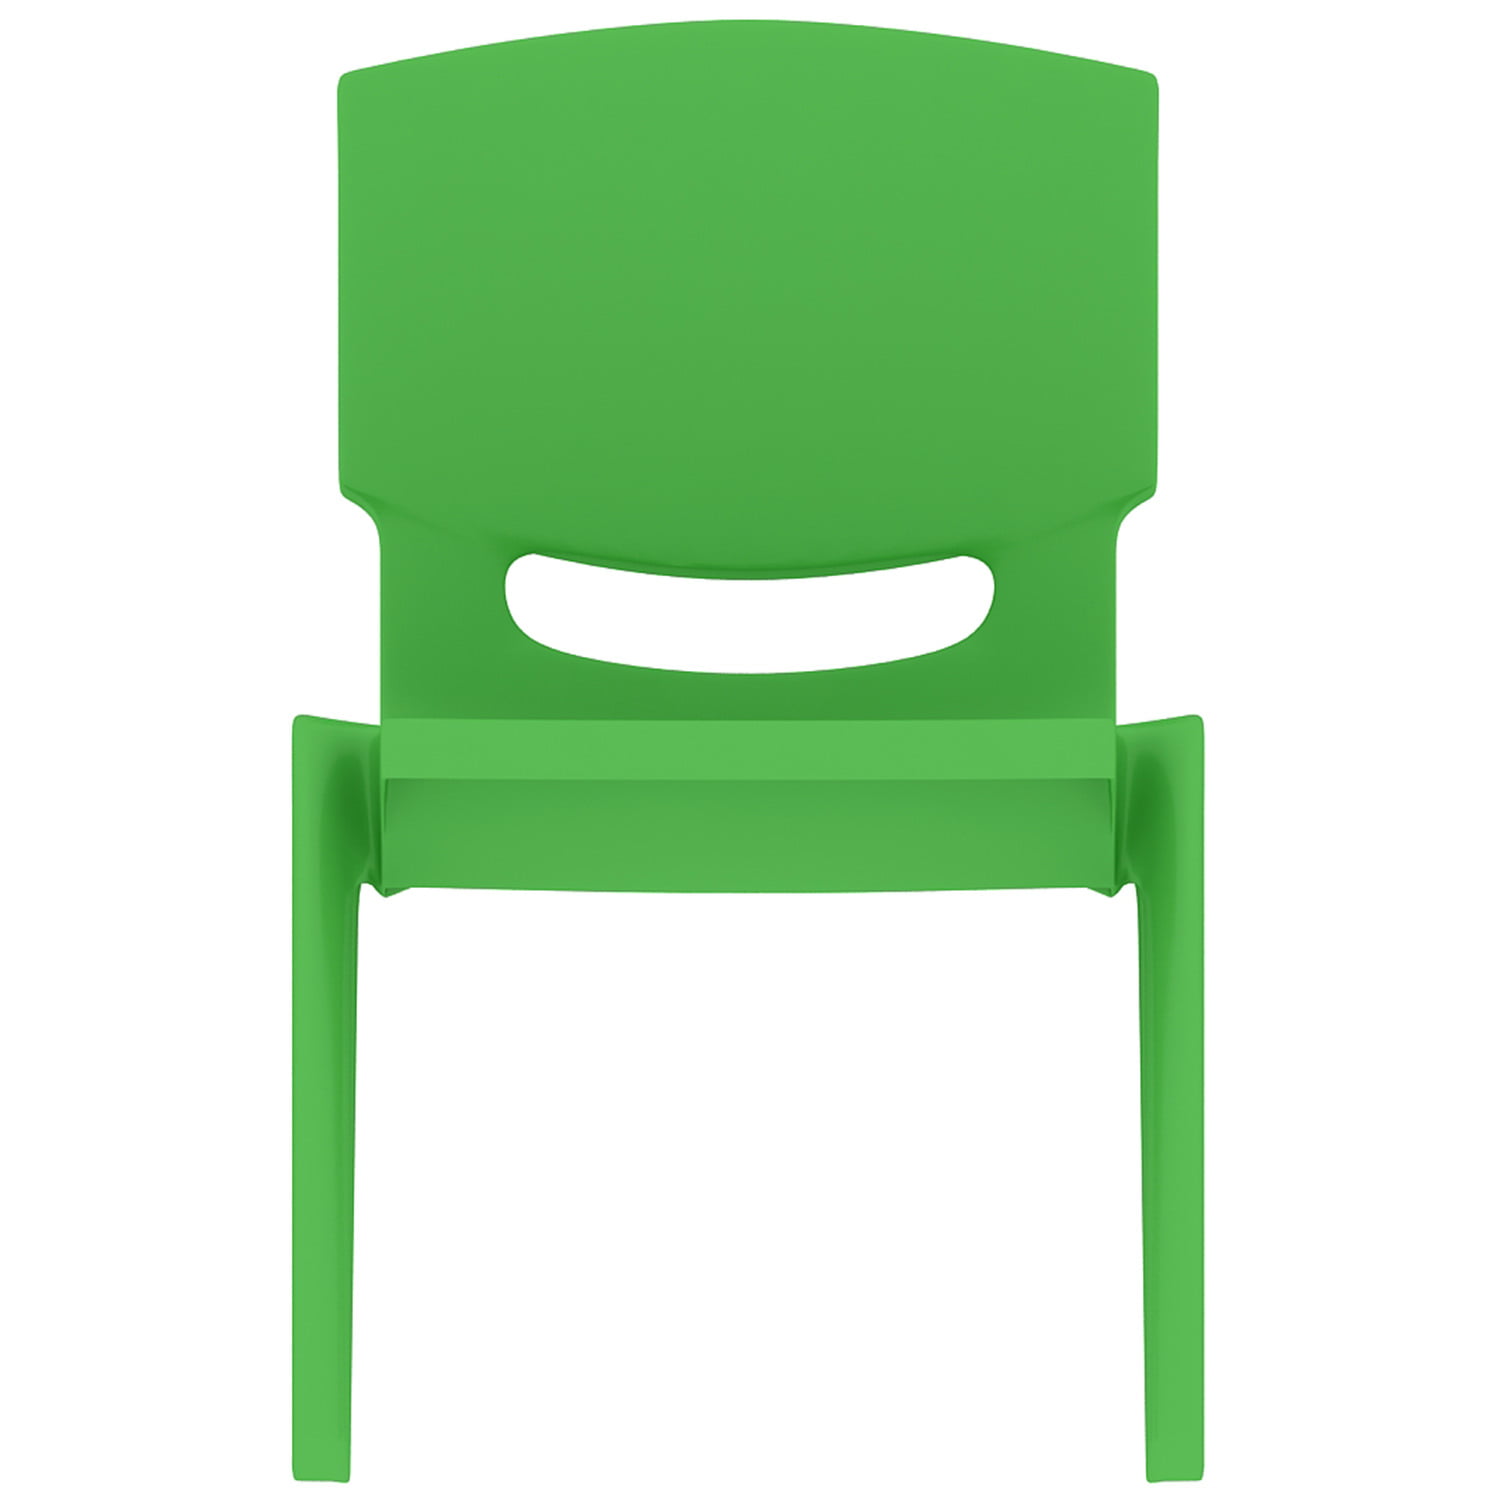 2xhome - Green - Kids Size Plastic Side Chair 12" Seat ...